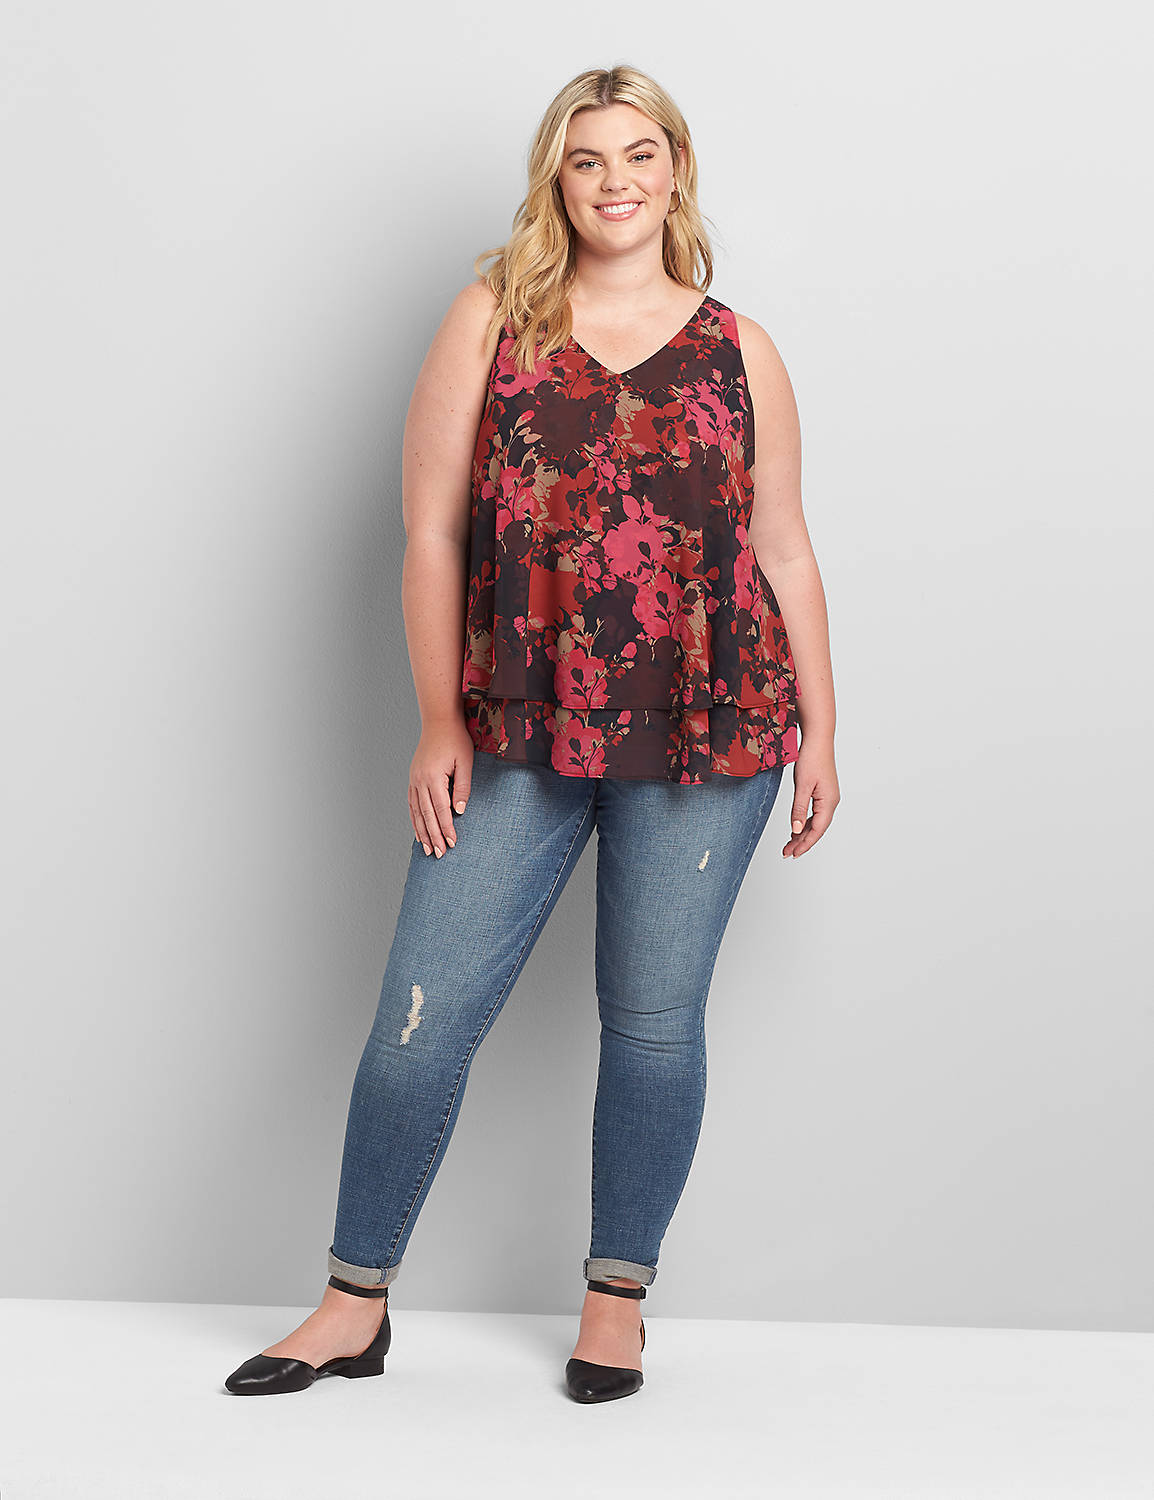 Outlet Sleeveless VNeck Double Layer Swing Tank -1114294:LBH20221_DrybrushedSilhouetteRoses_colorway1:12 Product Image 3